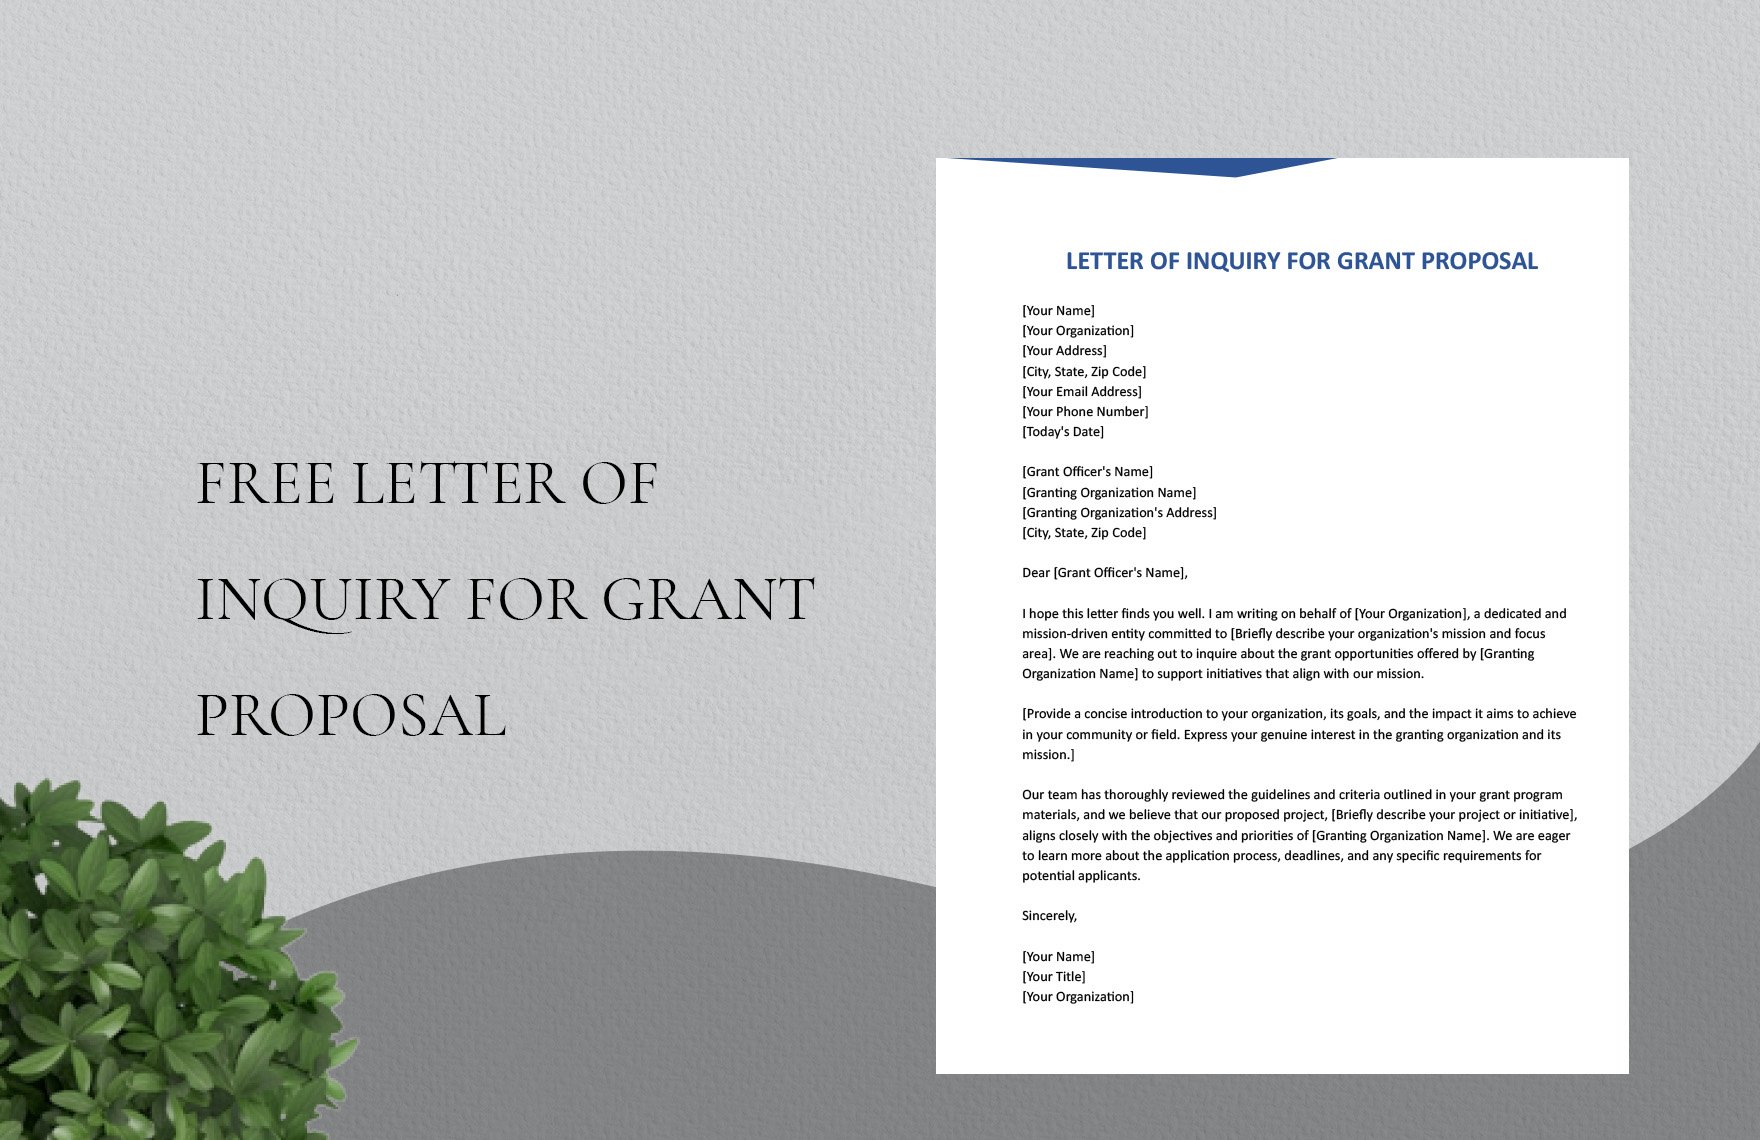 Letter Of Inquiry For Grant Proposal